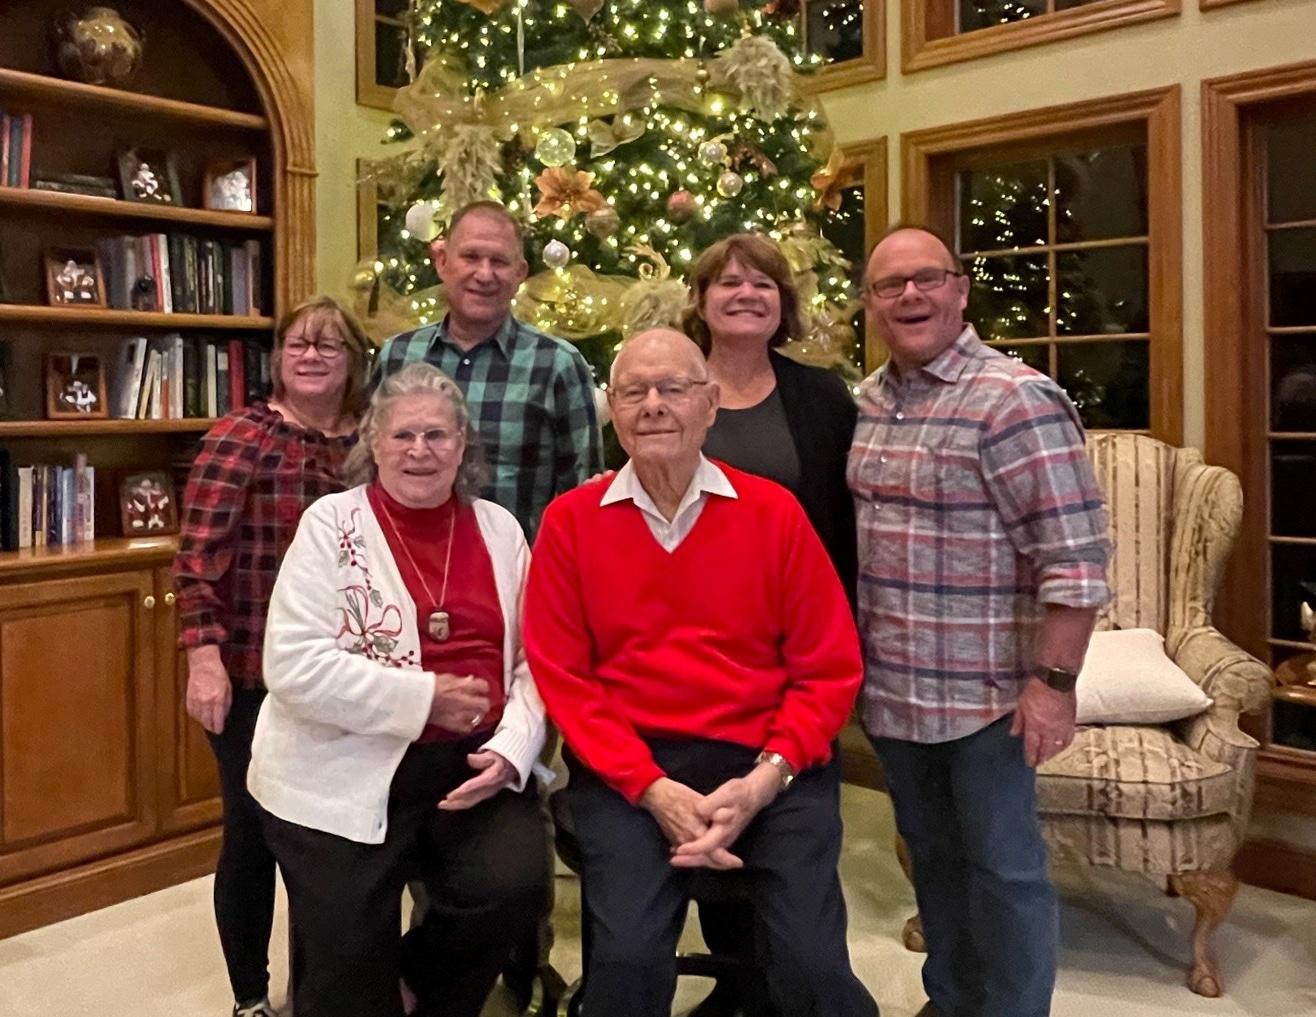 Ralph and Donna Korte with their adult children posing in front of a Christmas tree.